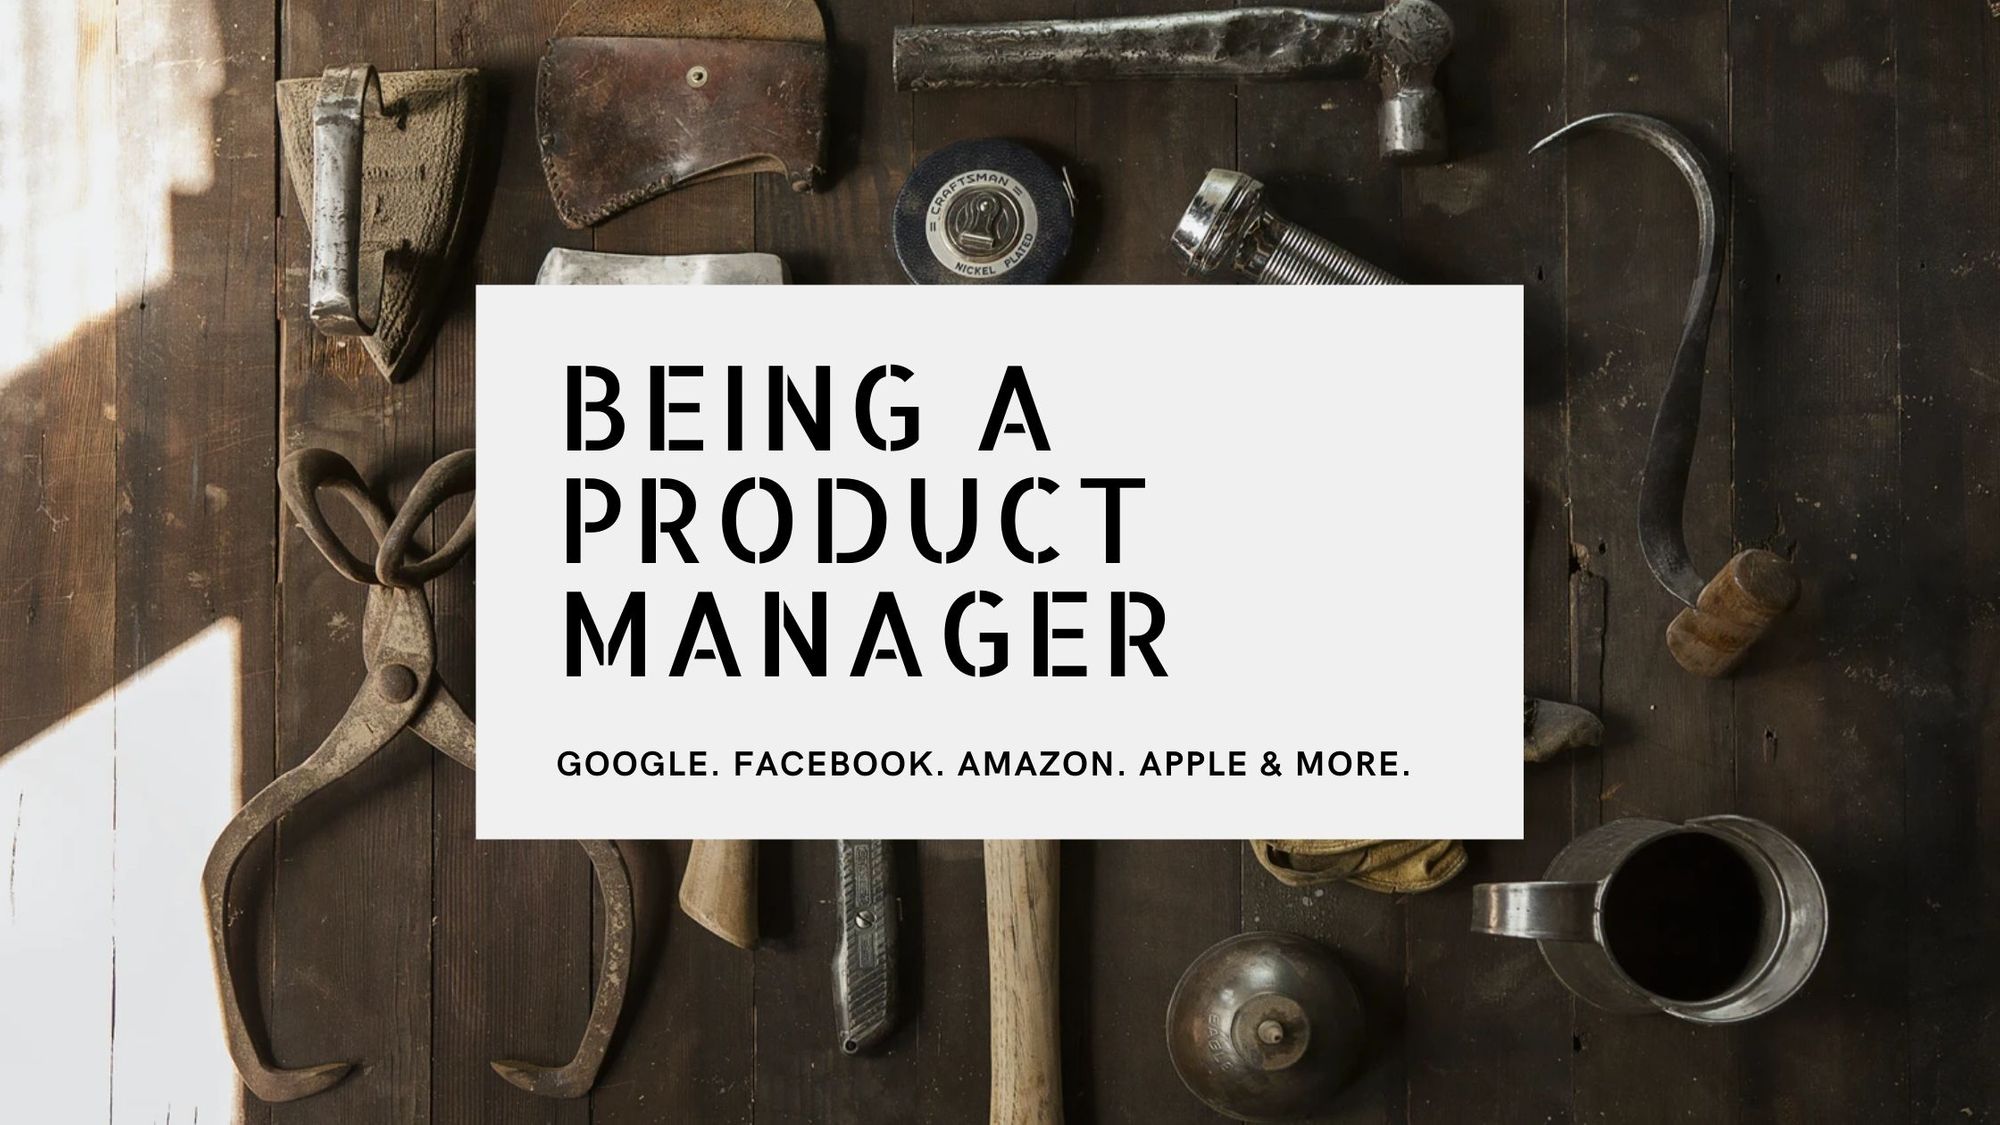 Being a product manager at Google, Facebook and Amazon